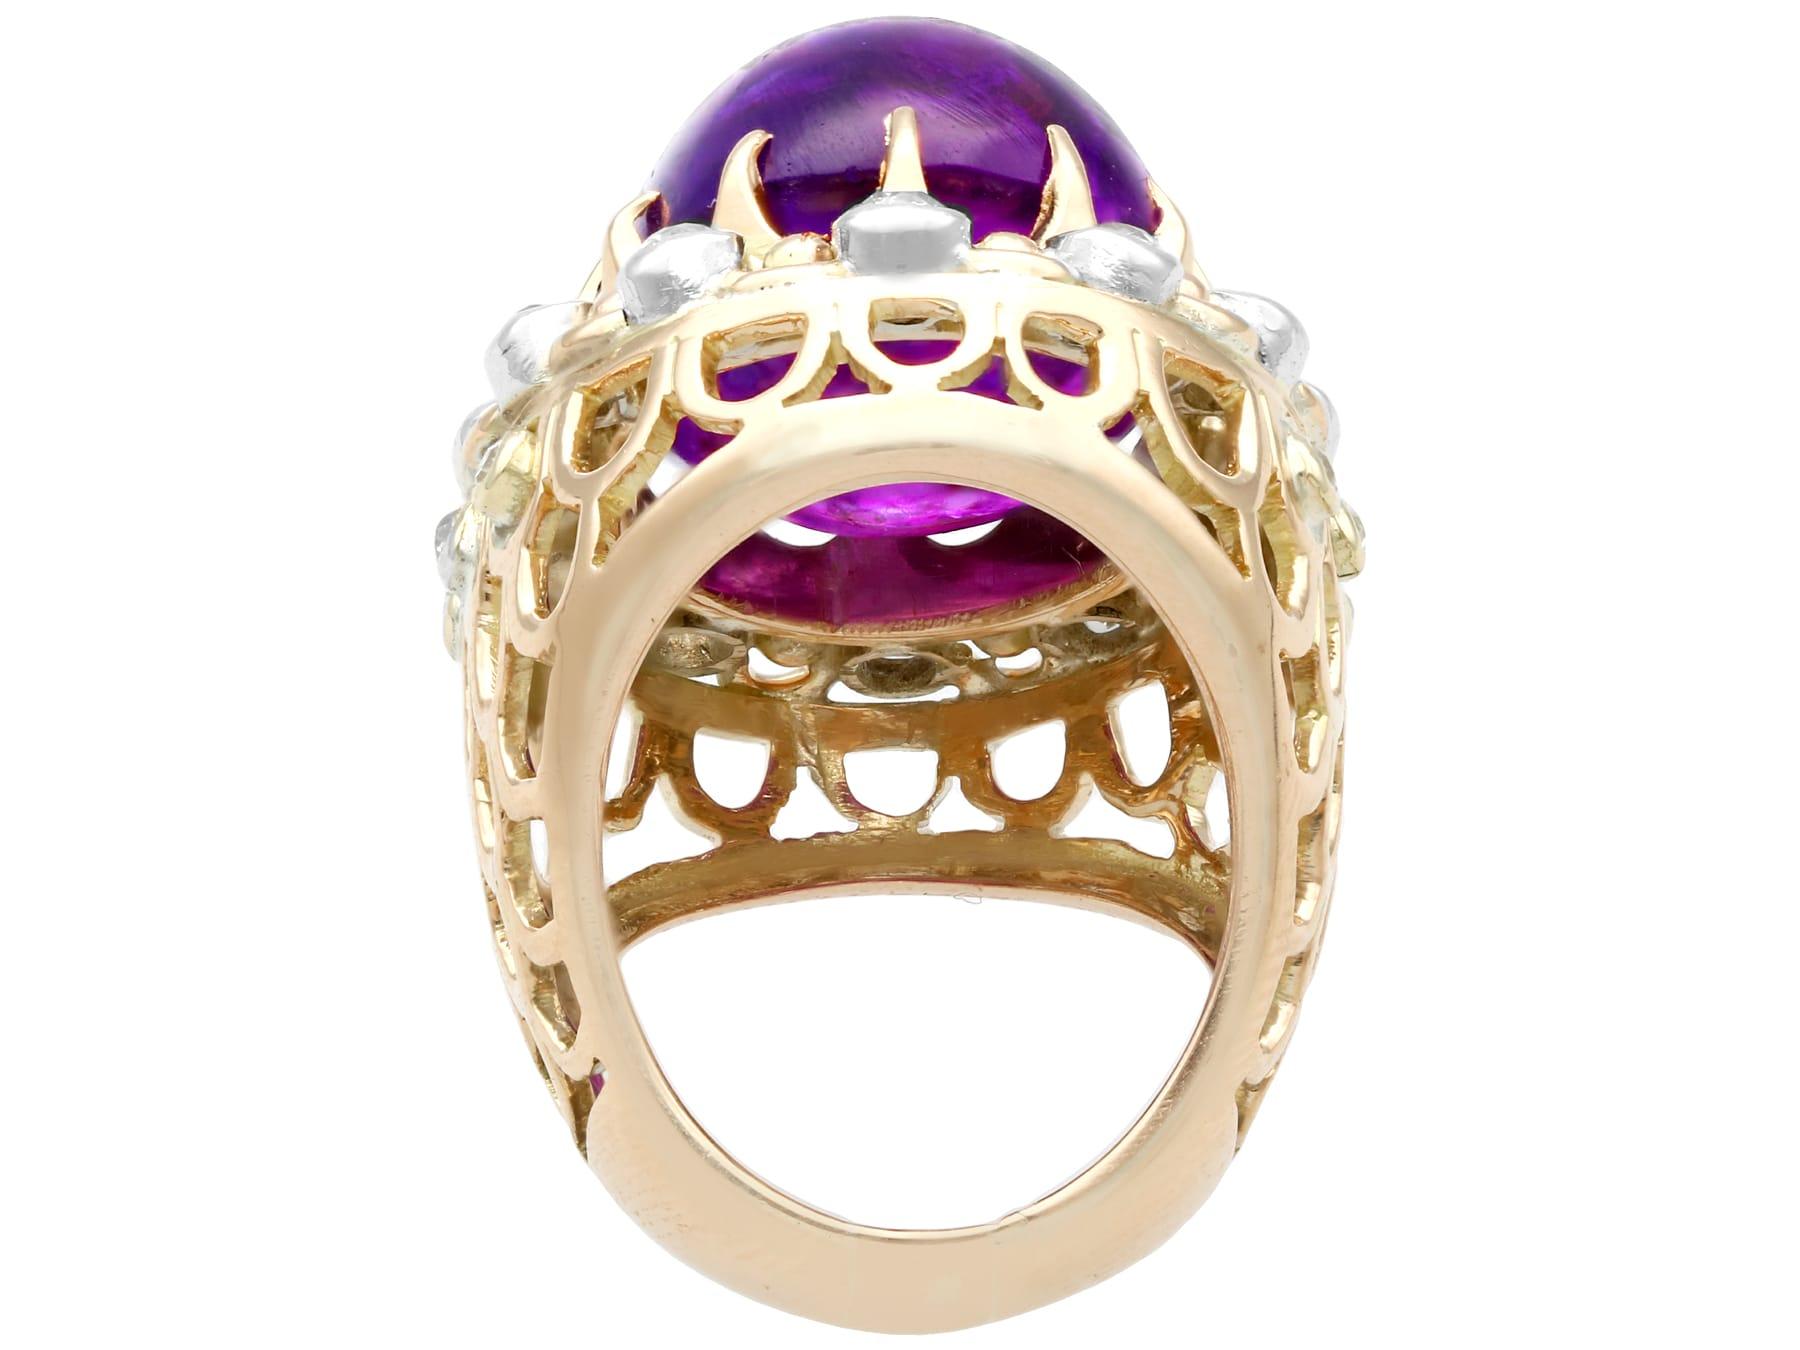 Women's or Men's 21.43 Carat Cabochon Cut Amethyst and 1.07 Carat Diamond Yellow Gold Ring For Sale